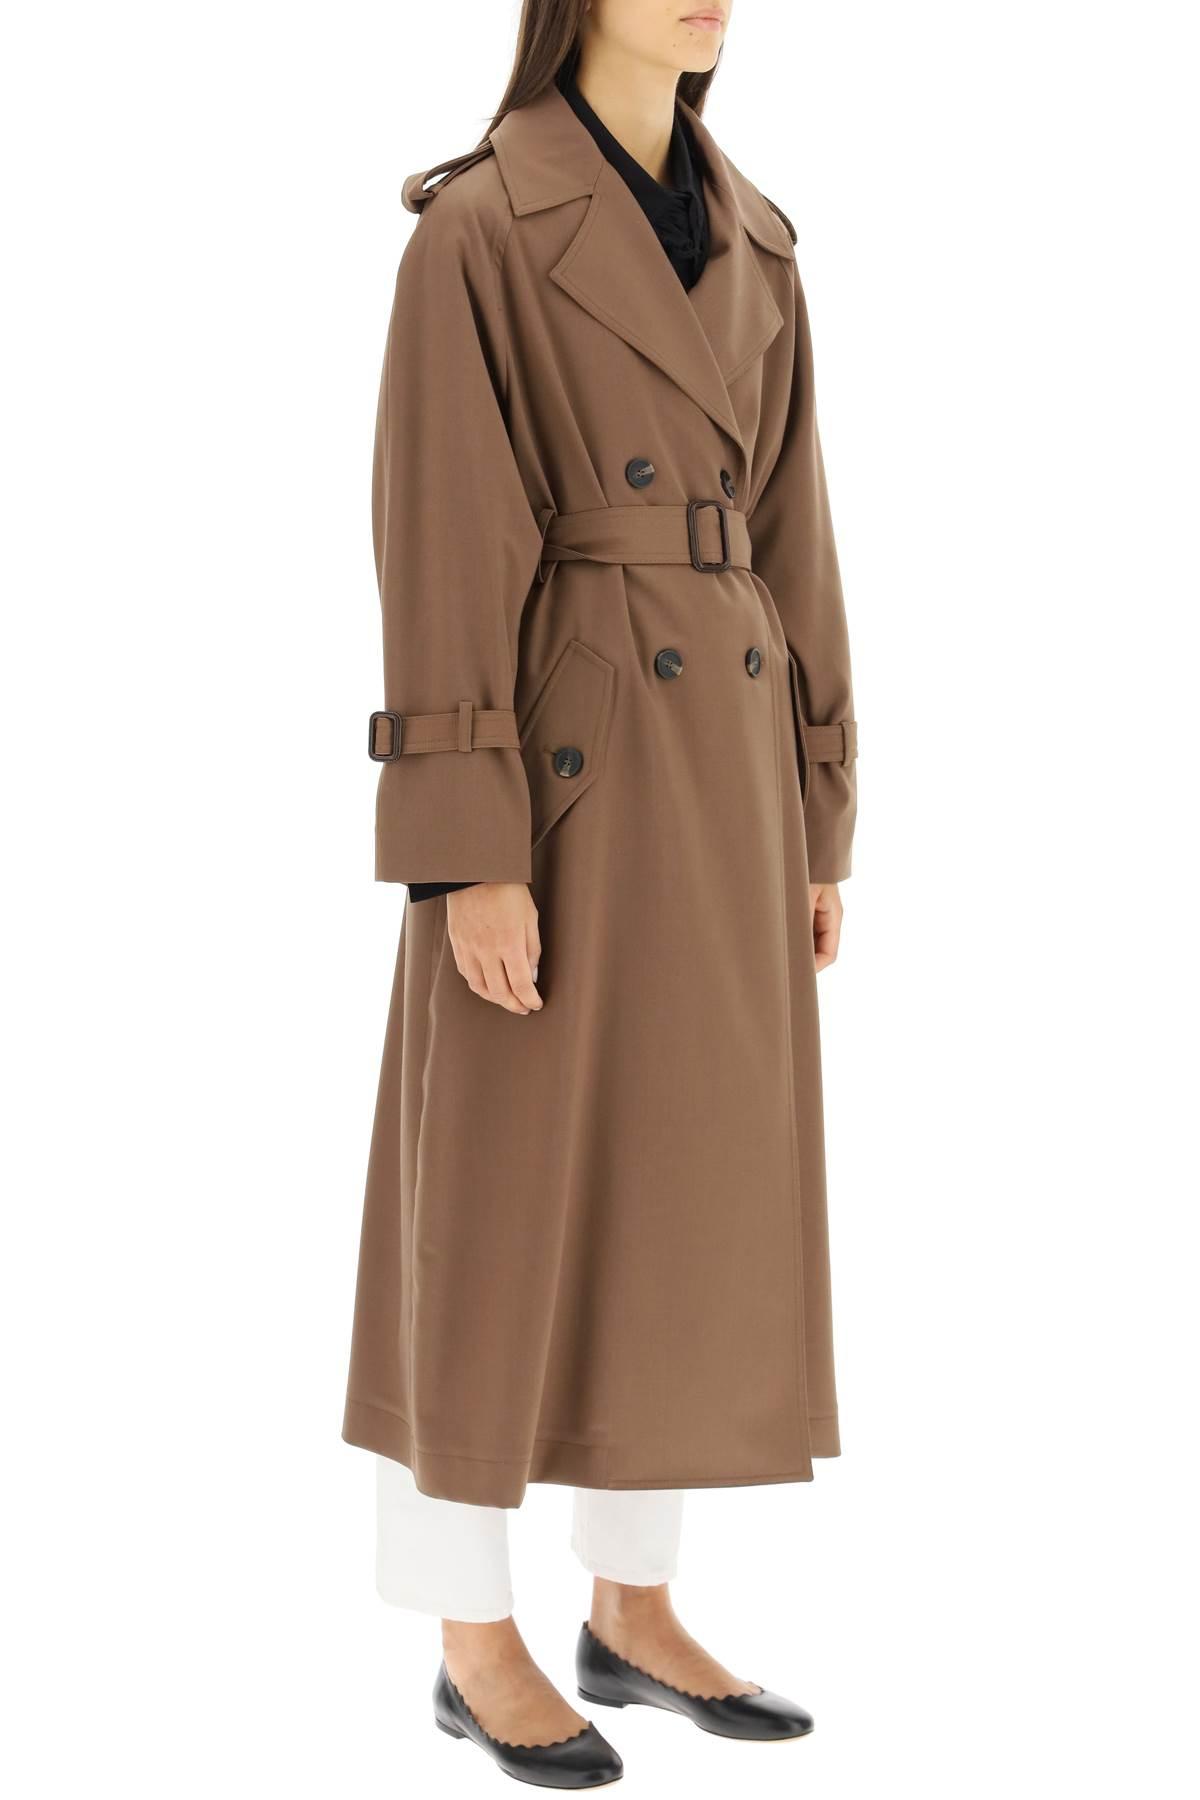 Weekend by Maxmara 'barni' Long Double-breasted Trench Coat in Brown | Lyst